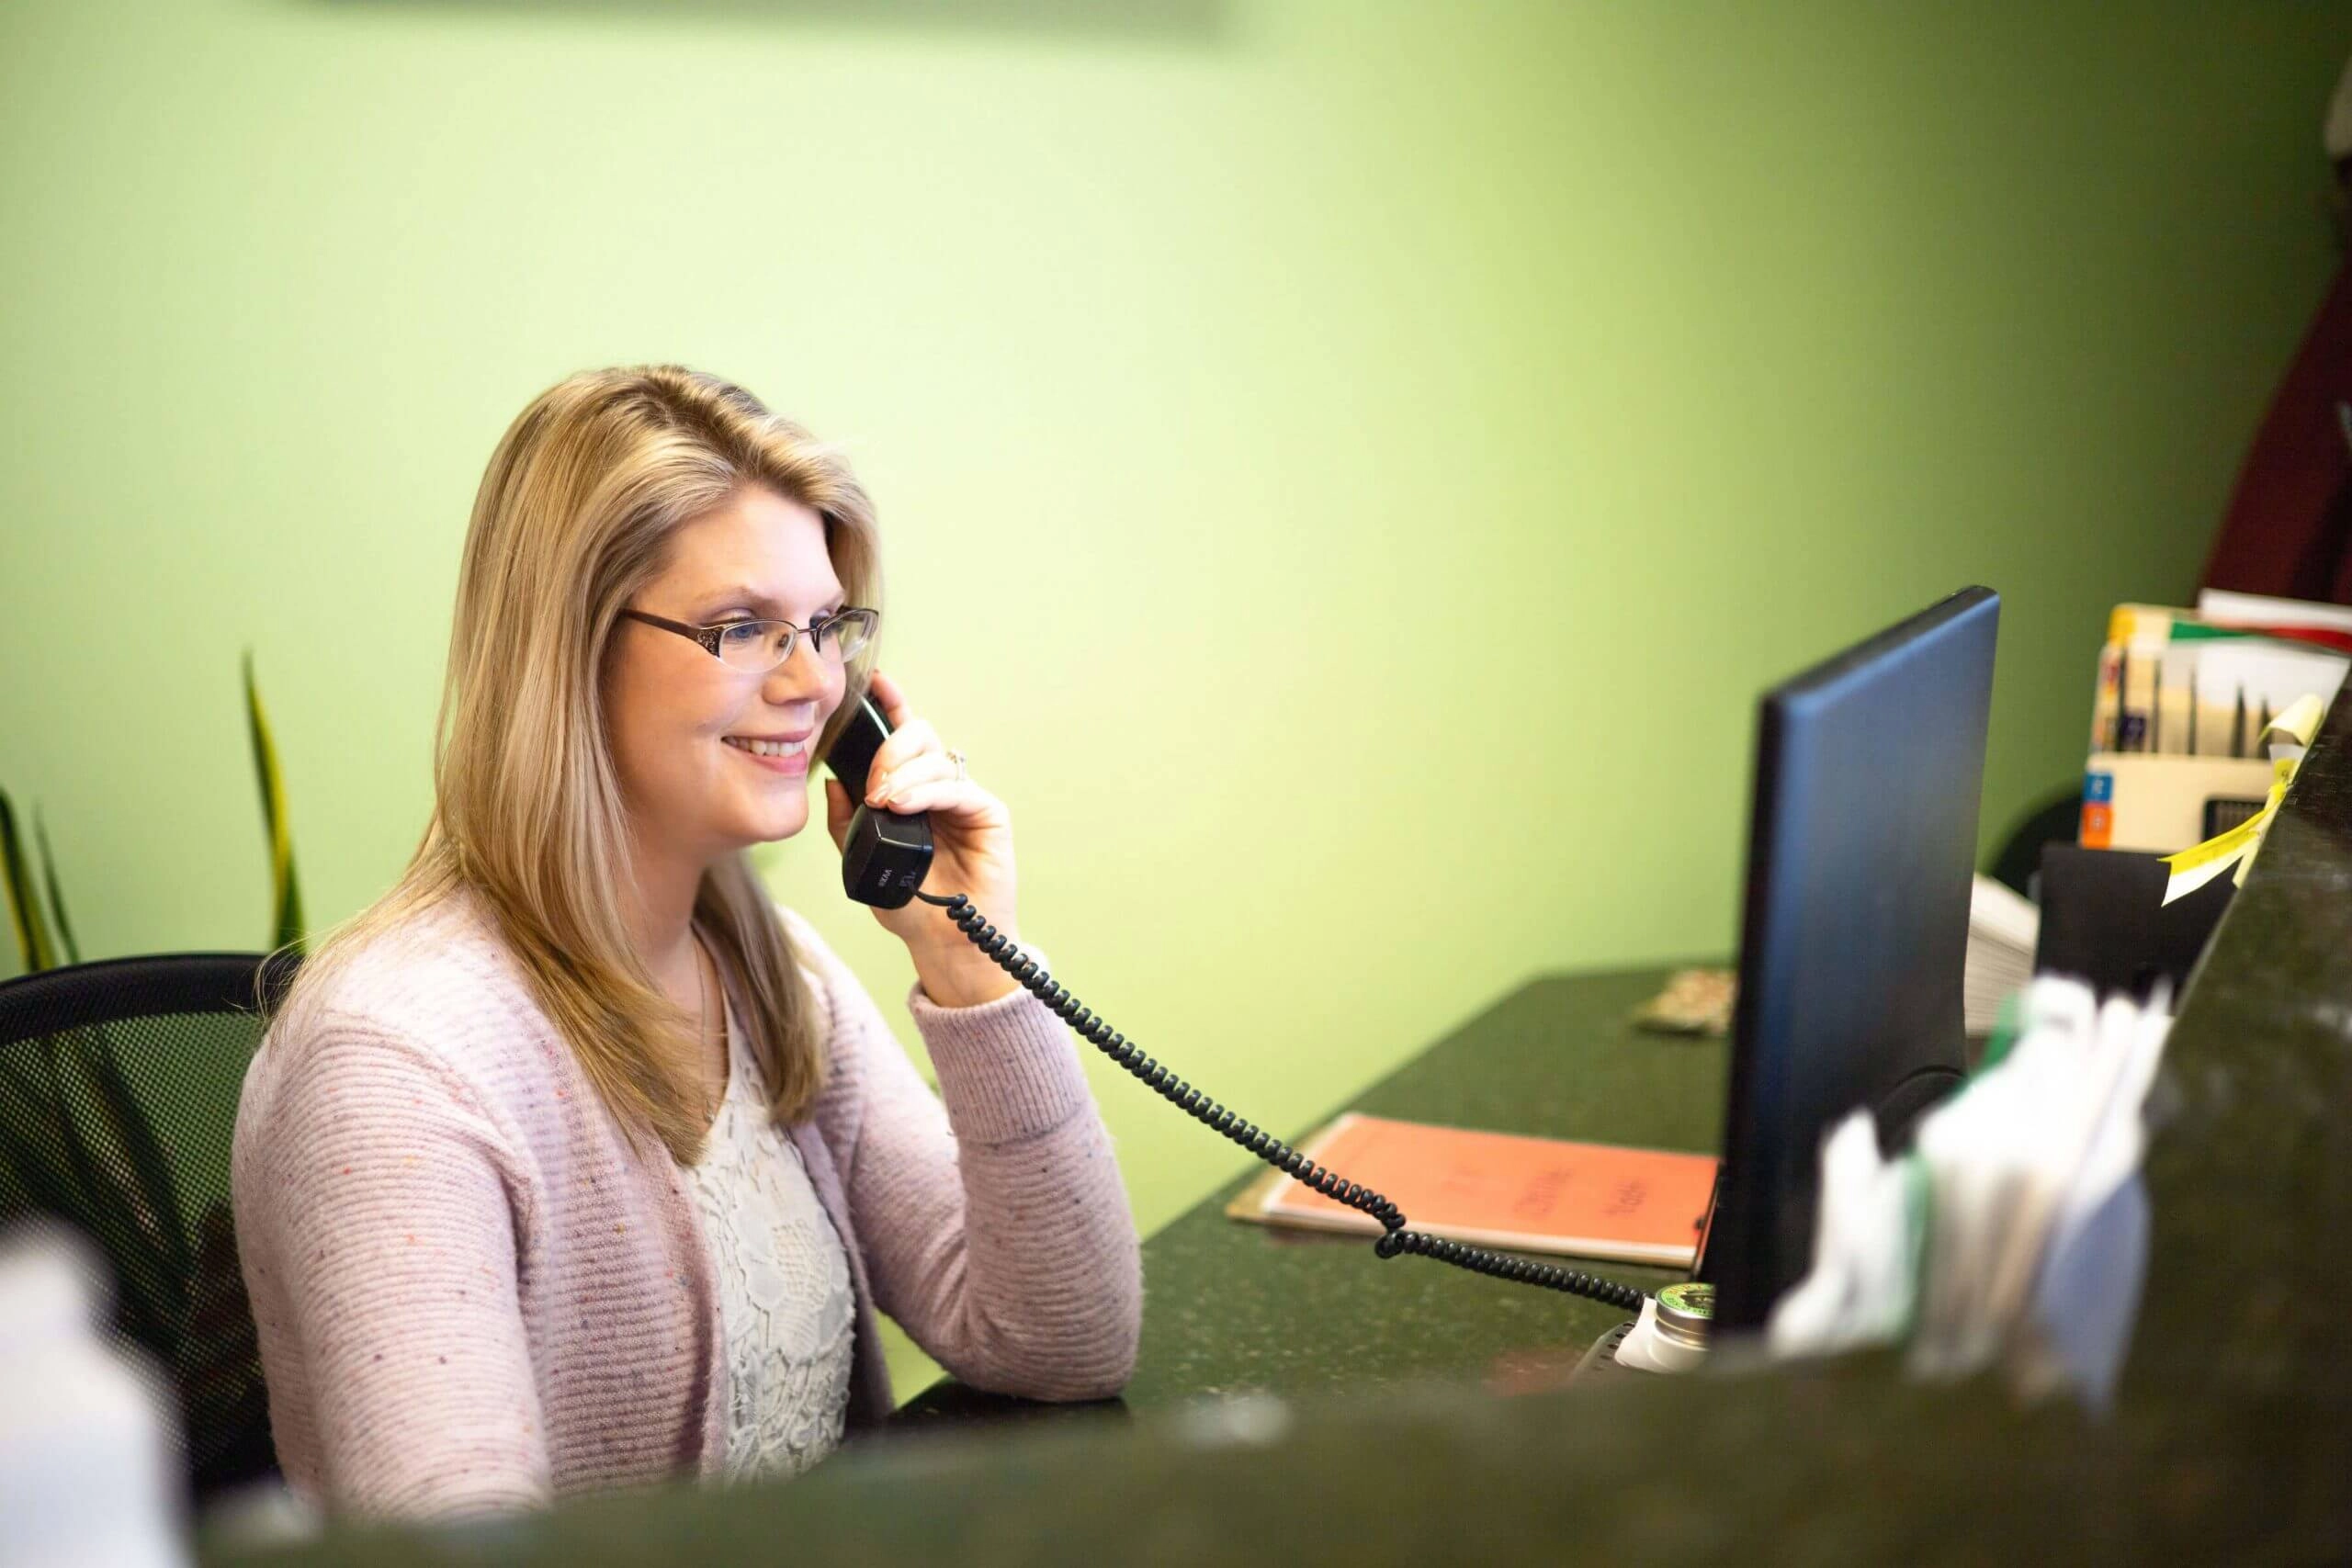 A woman answering phone calls in a reception desk.